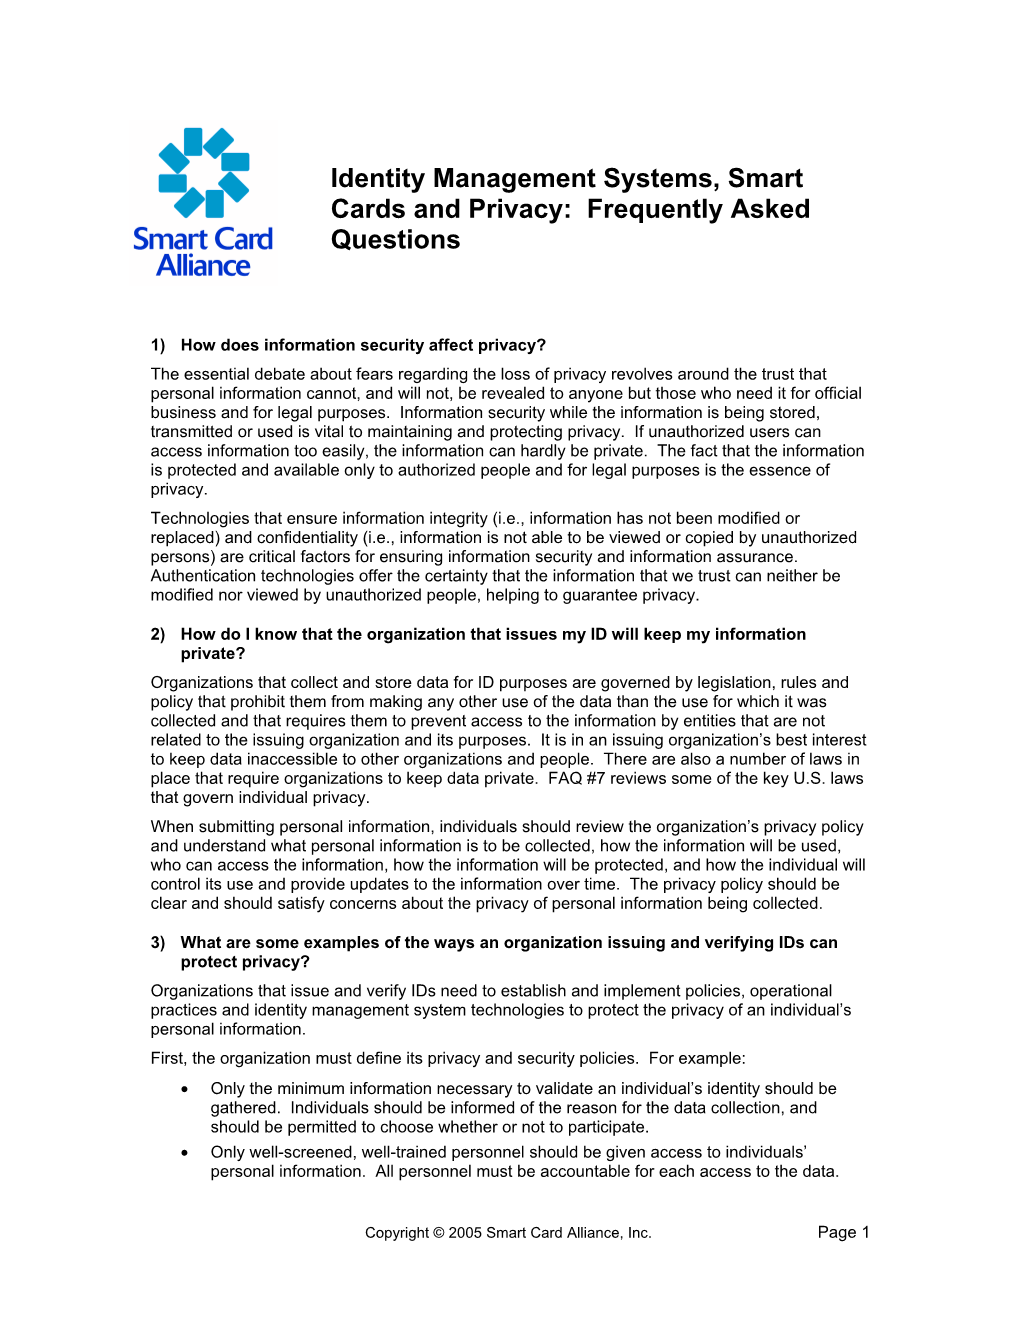 Identity Management Systems, Smart Cards and Privacy: Frequently Asked Questions